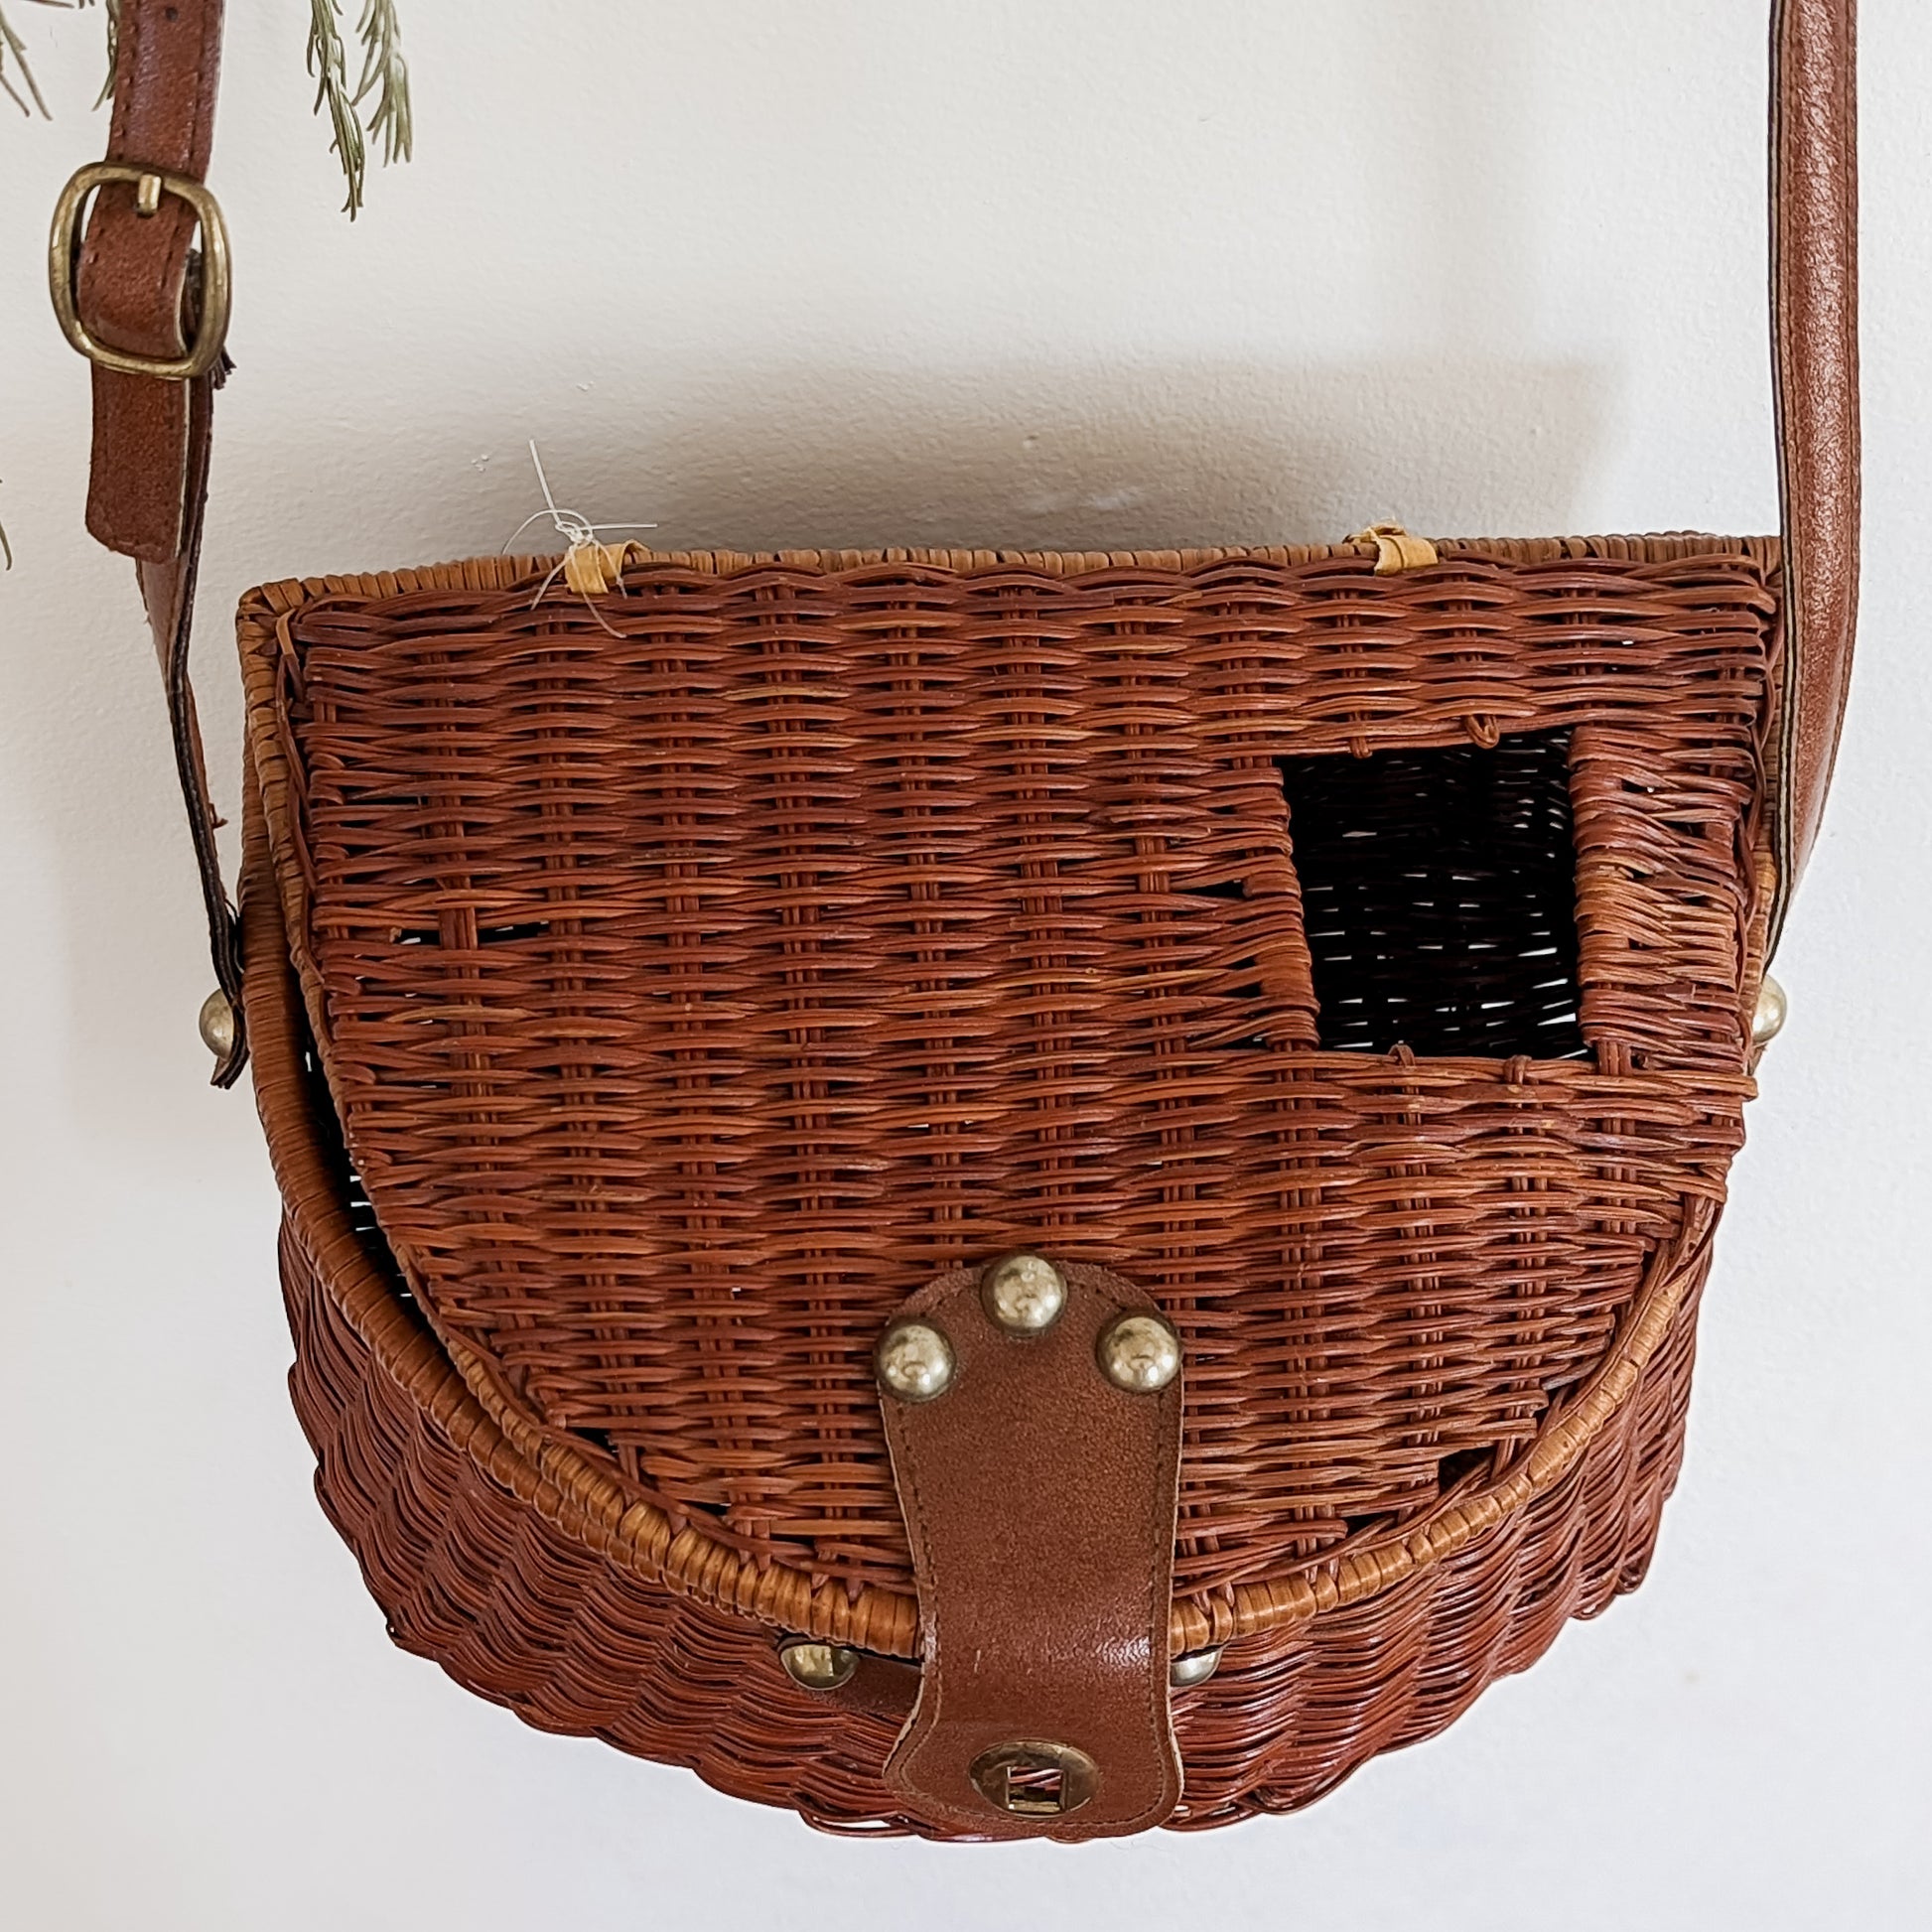 Lot# 109 - Antique Fly Fishing Creel Wicker Basket with Leather